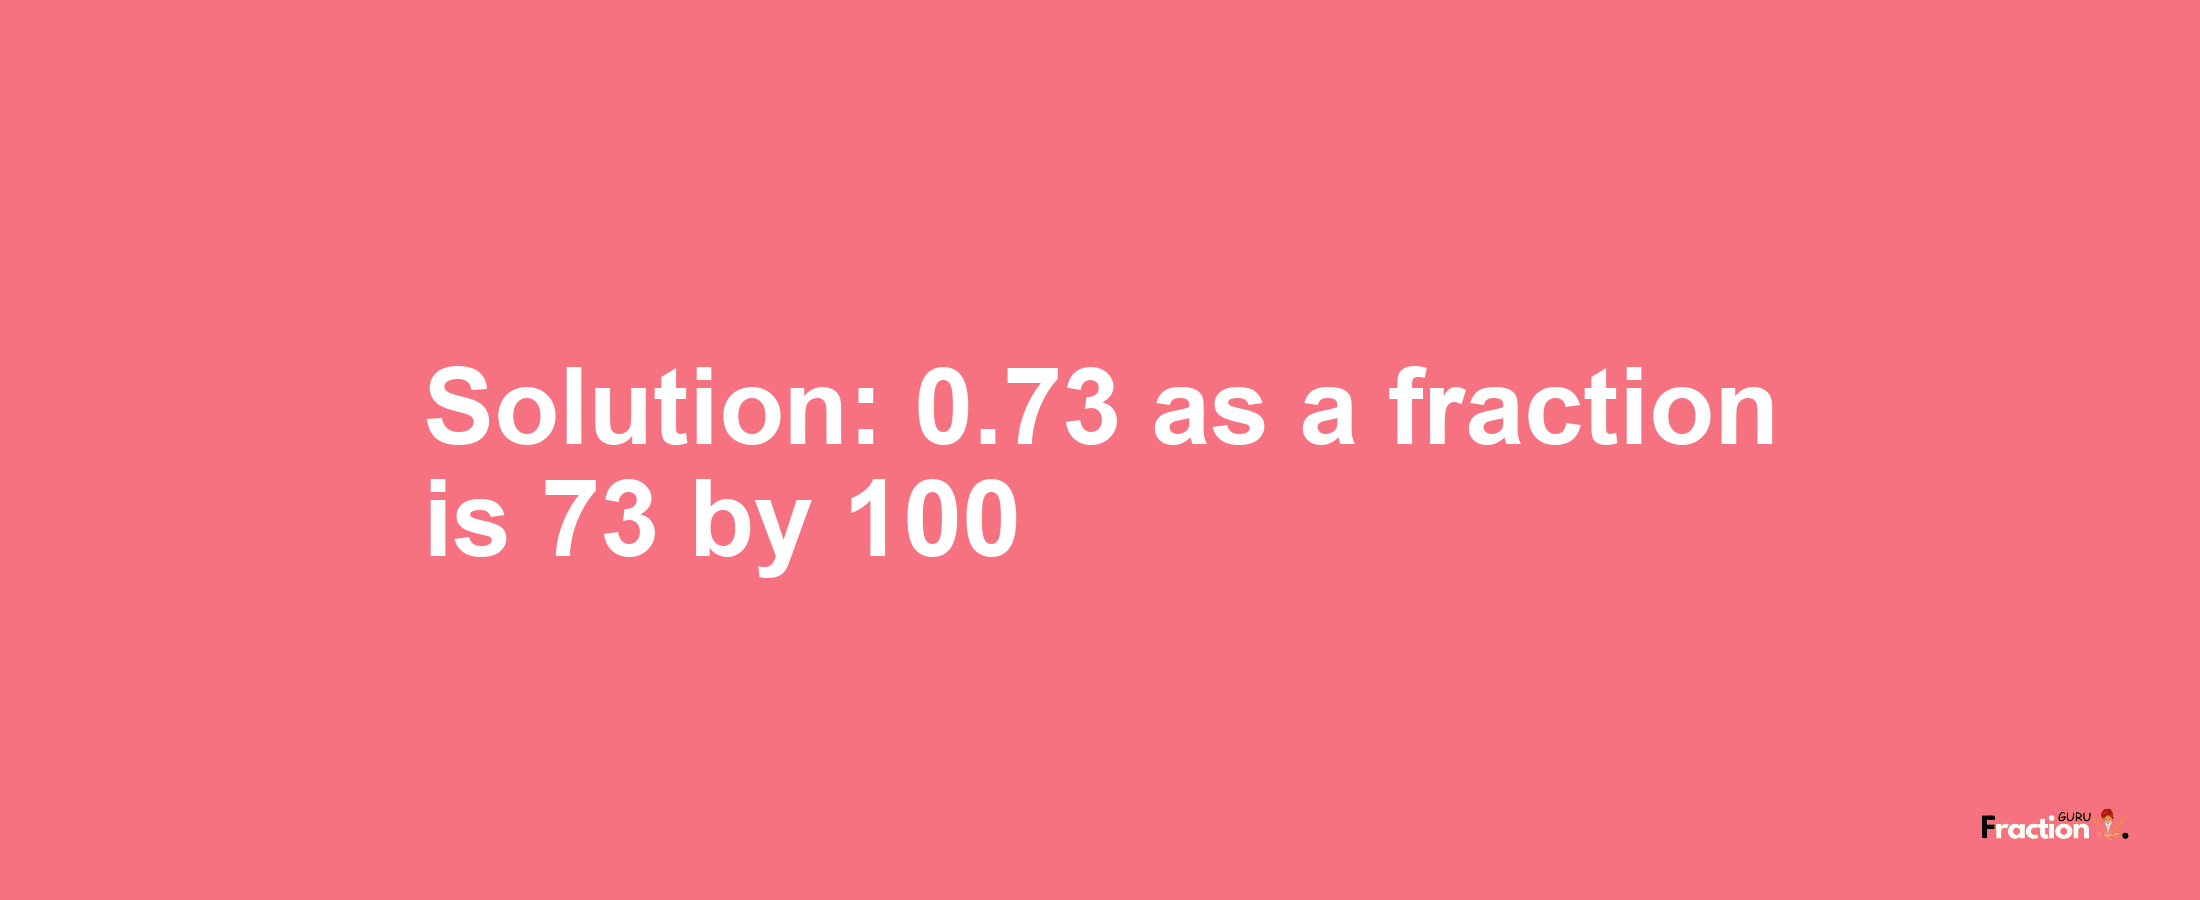 Solution:0.73 as a fraction is 73/100